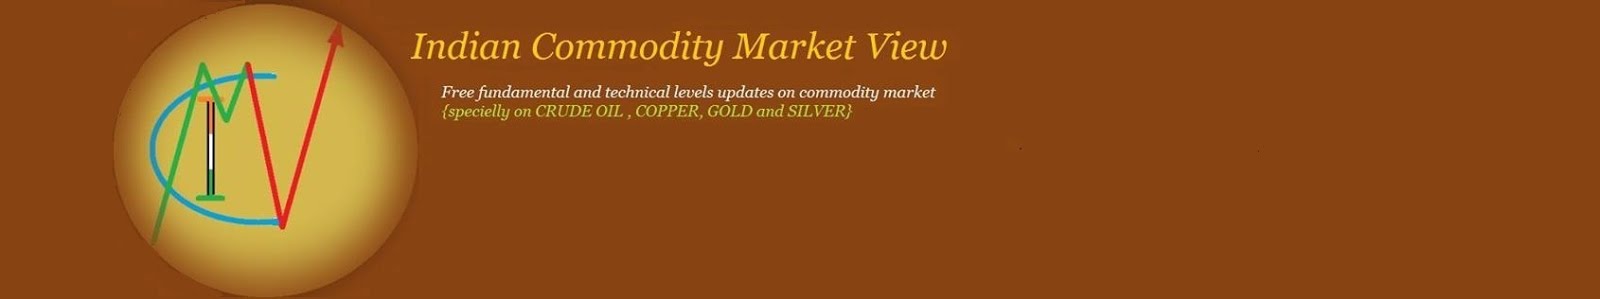 Indian commodity market view